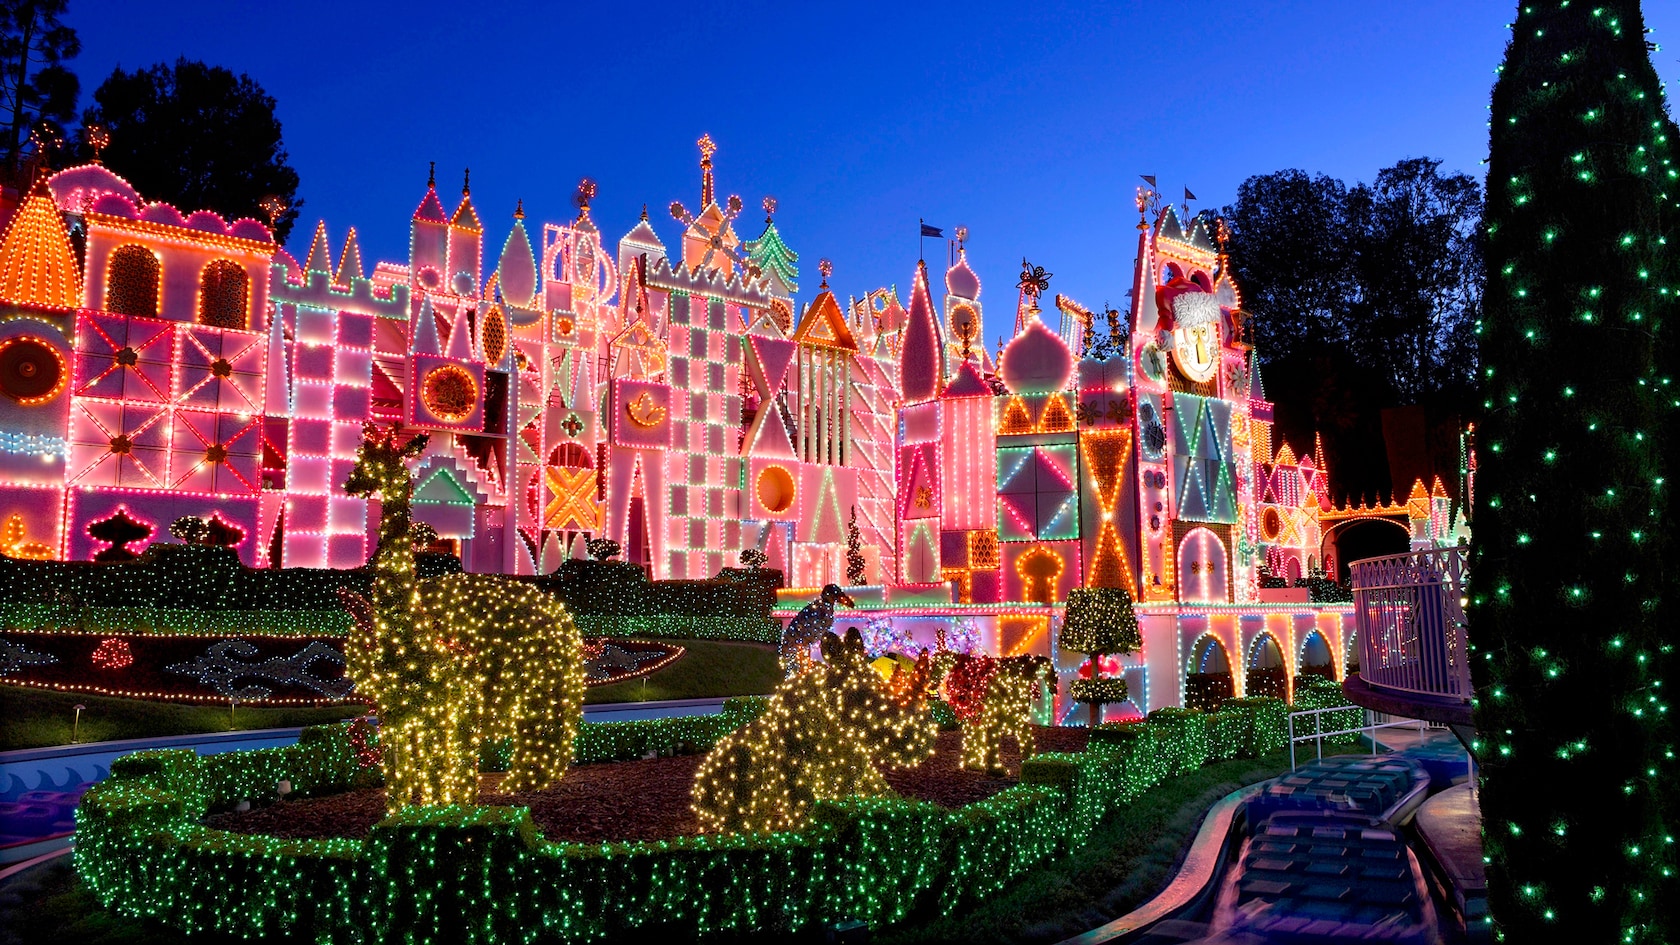 The It?s a small world attraction at Disneyland park decorated for the holidays